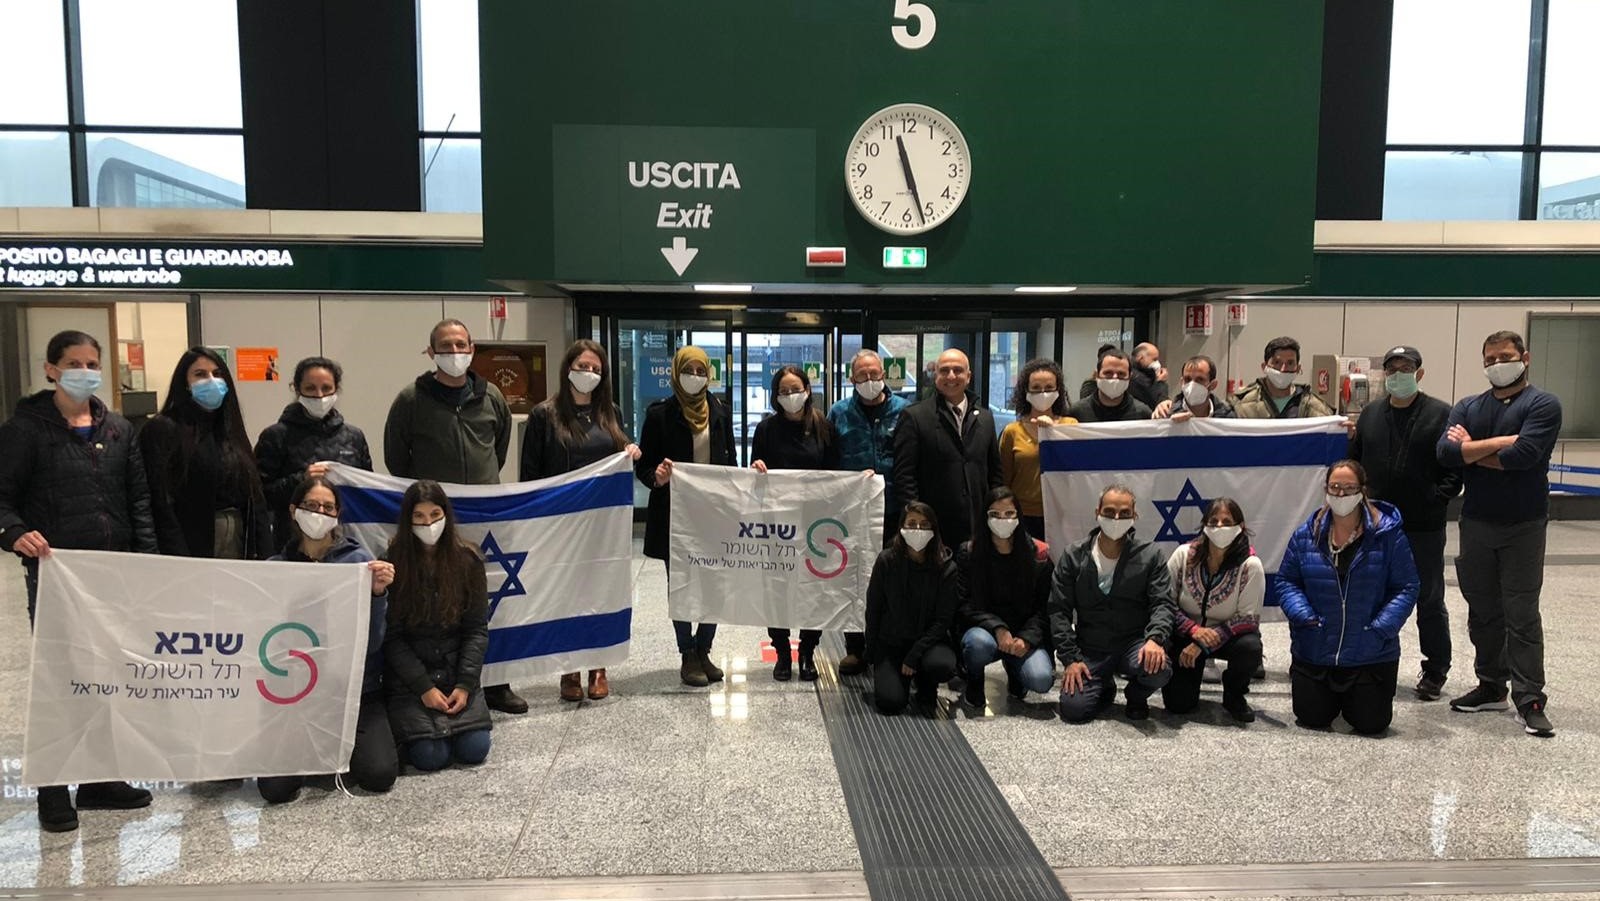 A team of Israeli medical experts landed in Italy on December 2, 2020, to help a Piedmont District hospital cope with a surge in Covid-19 patients. Photo courtesy of Sheba Medical Center